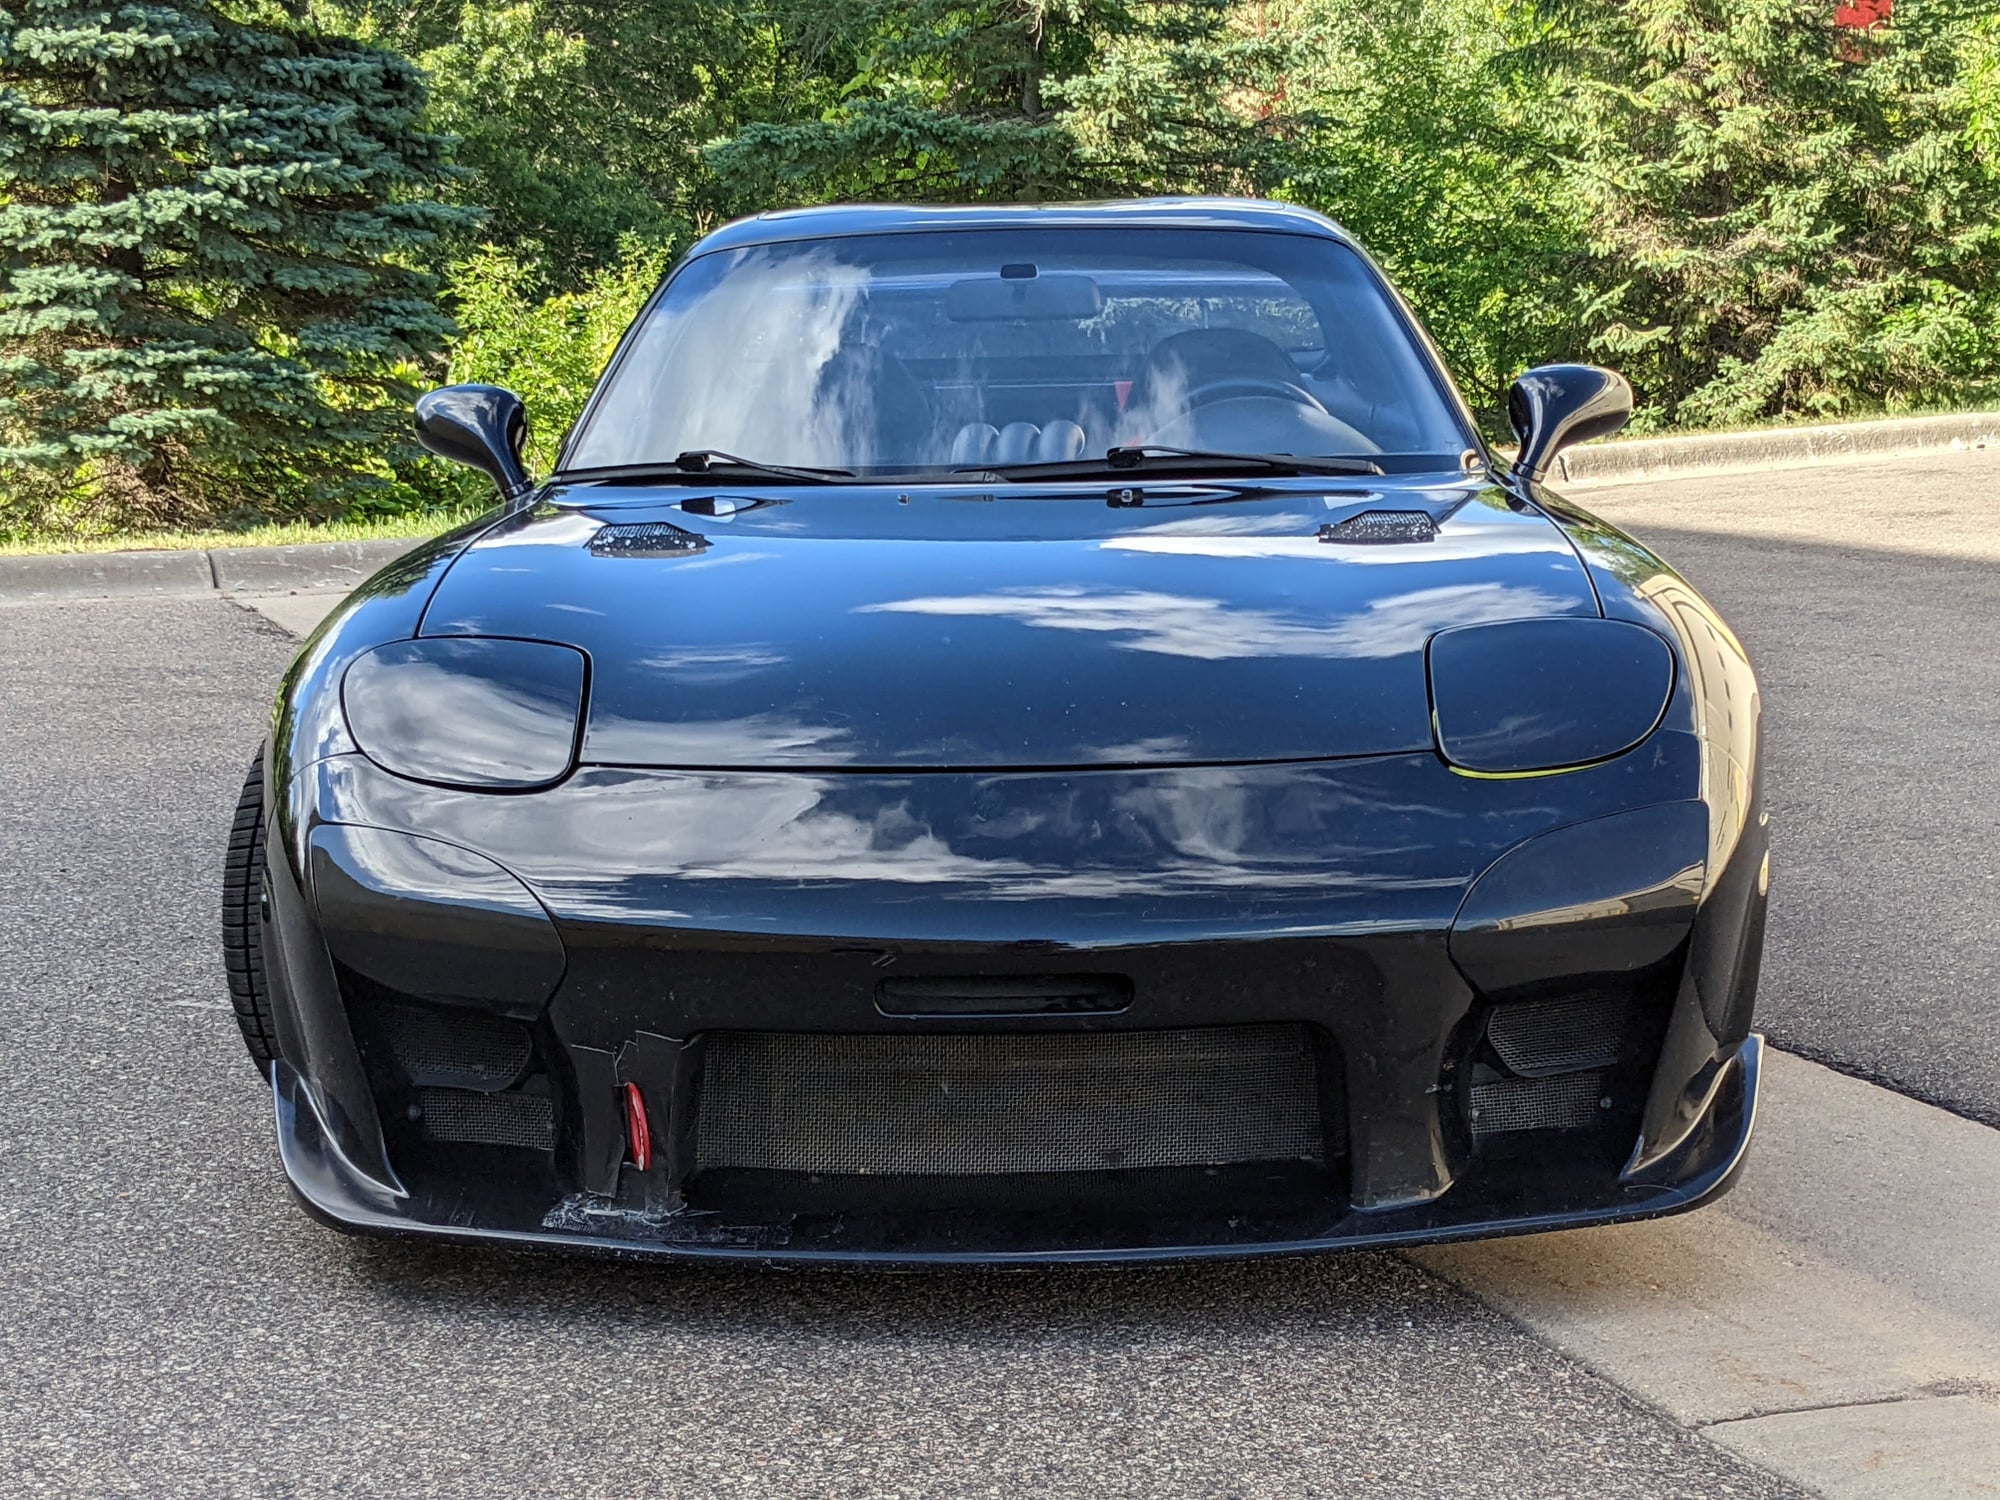 1993 Mazda RX-7 - 1993 Black FD - built for the Street/Track - Used - VIN JM1FD3312P0210372 - 108,500 Miles - Other - 2WD - Manual - Coupe - Black - Eden Prairie, MN 55346, United States